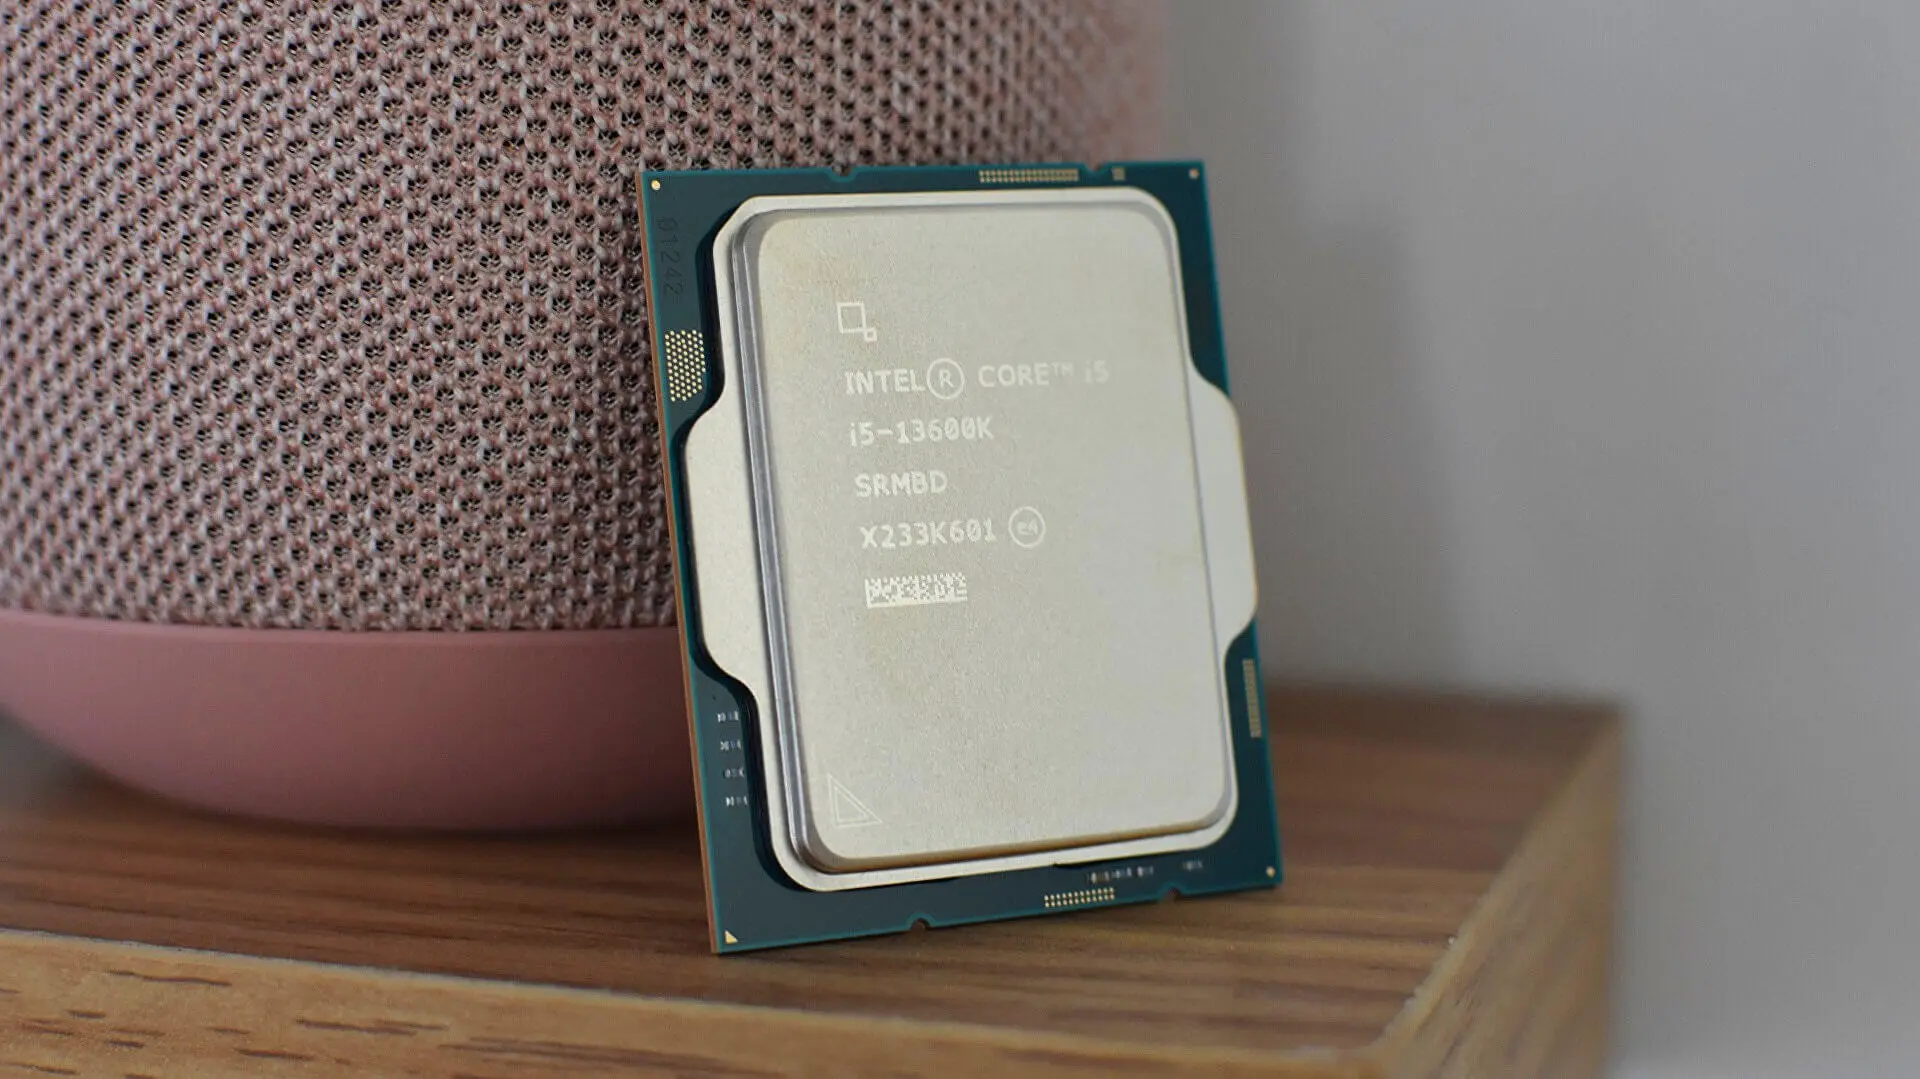 Intel-i5-13600K-surpasses-AMD-in-terms-of-value.-A-great-value-processor-for-gaming-and-productivity-1